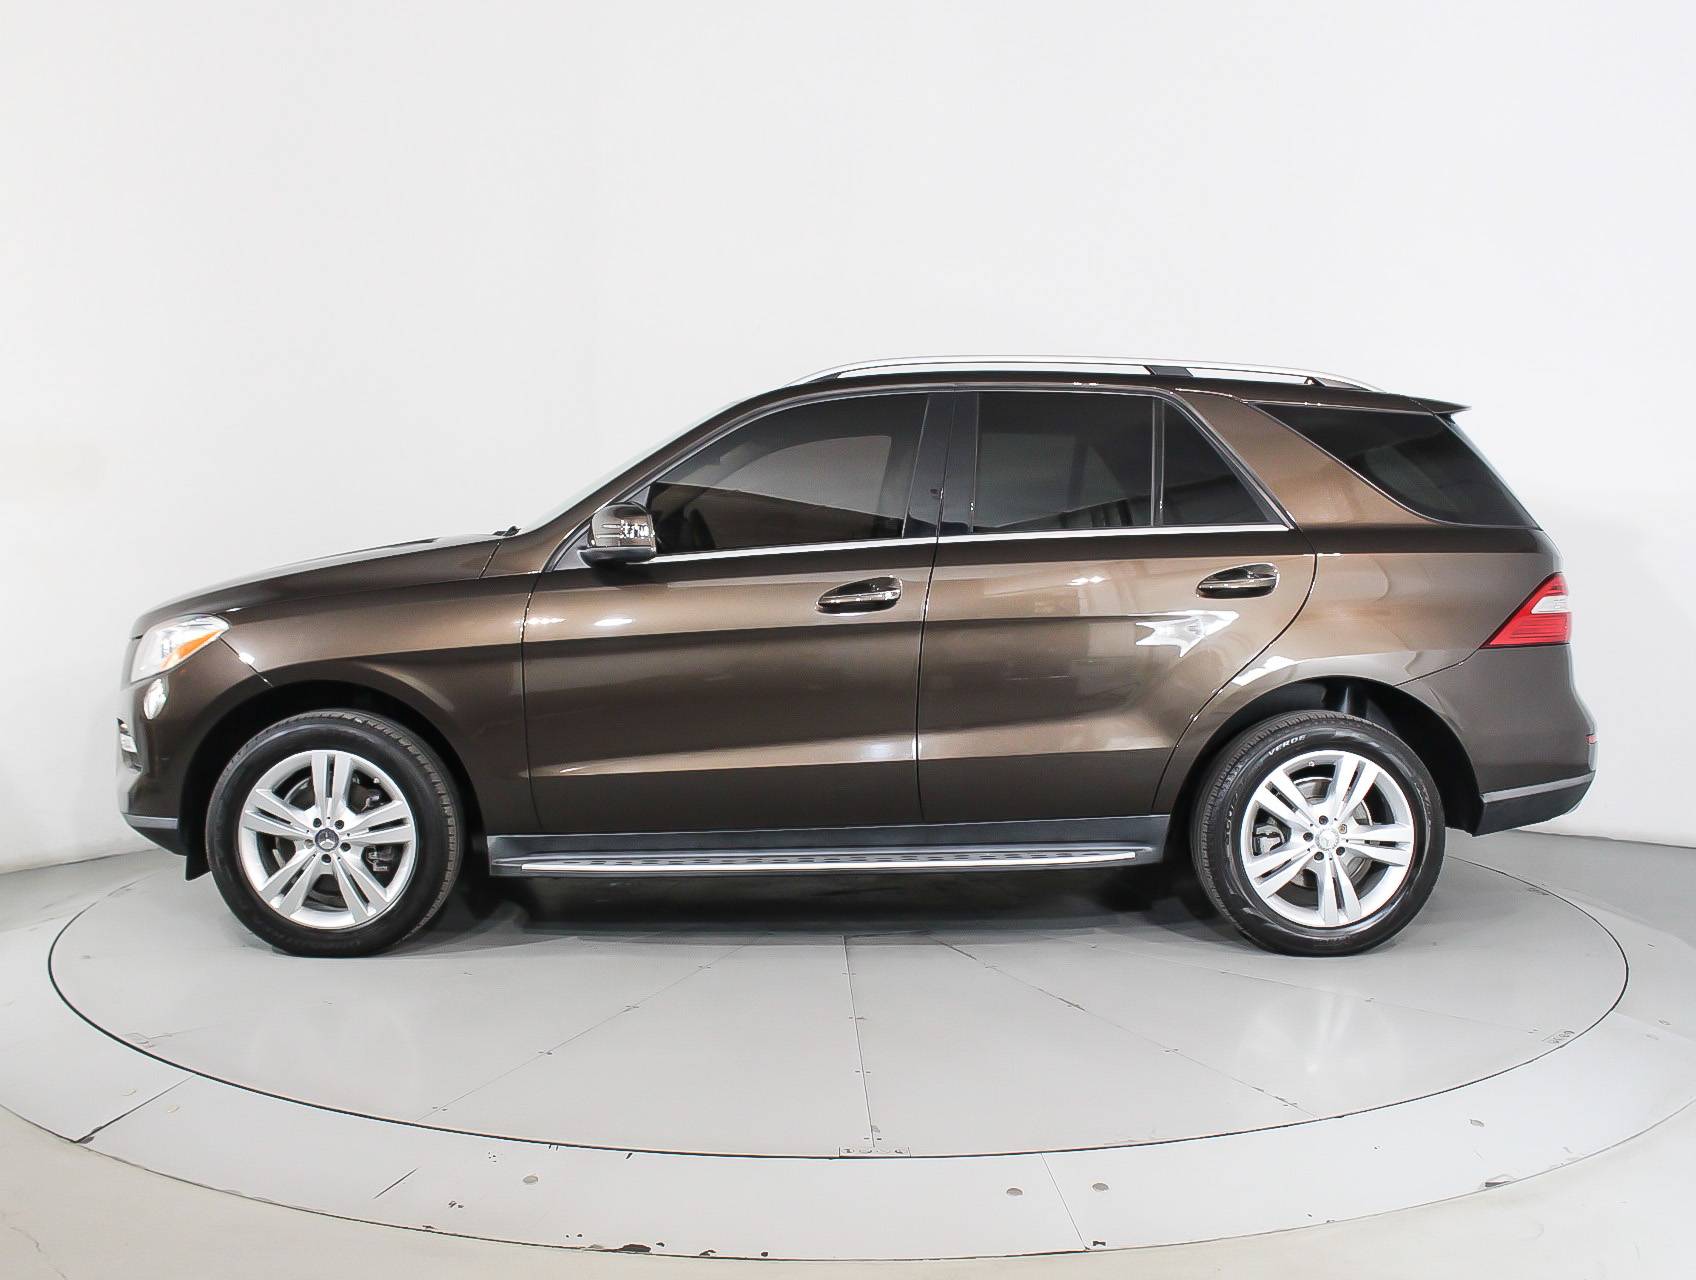 Used 2013 MERCEDES-BENZ M CLASS ML350 for sale in MIAMI | 96009